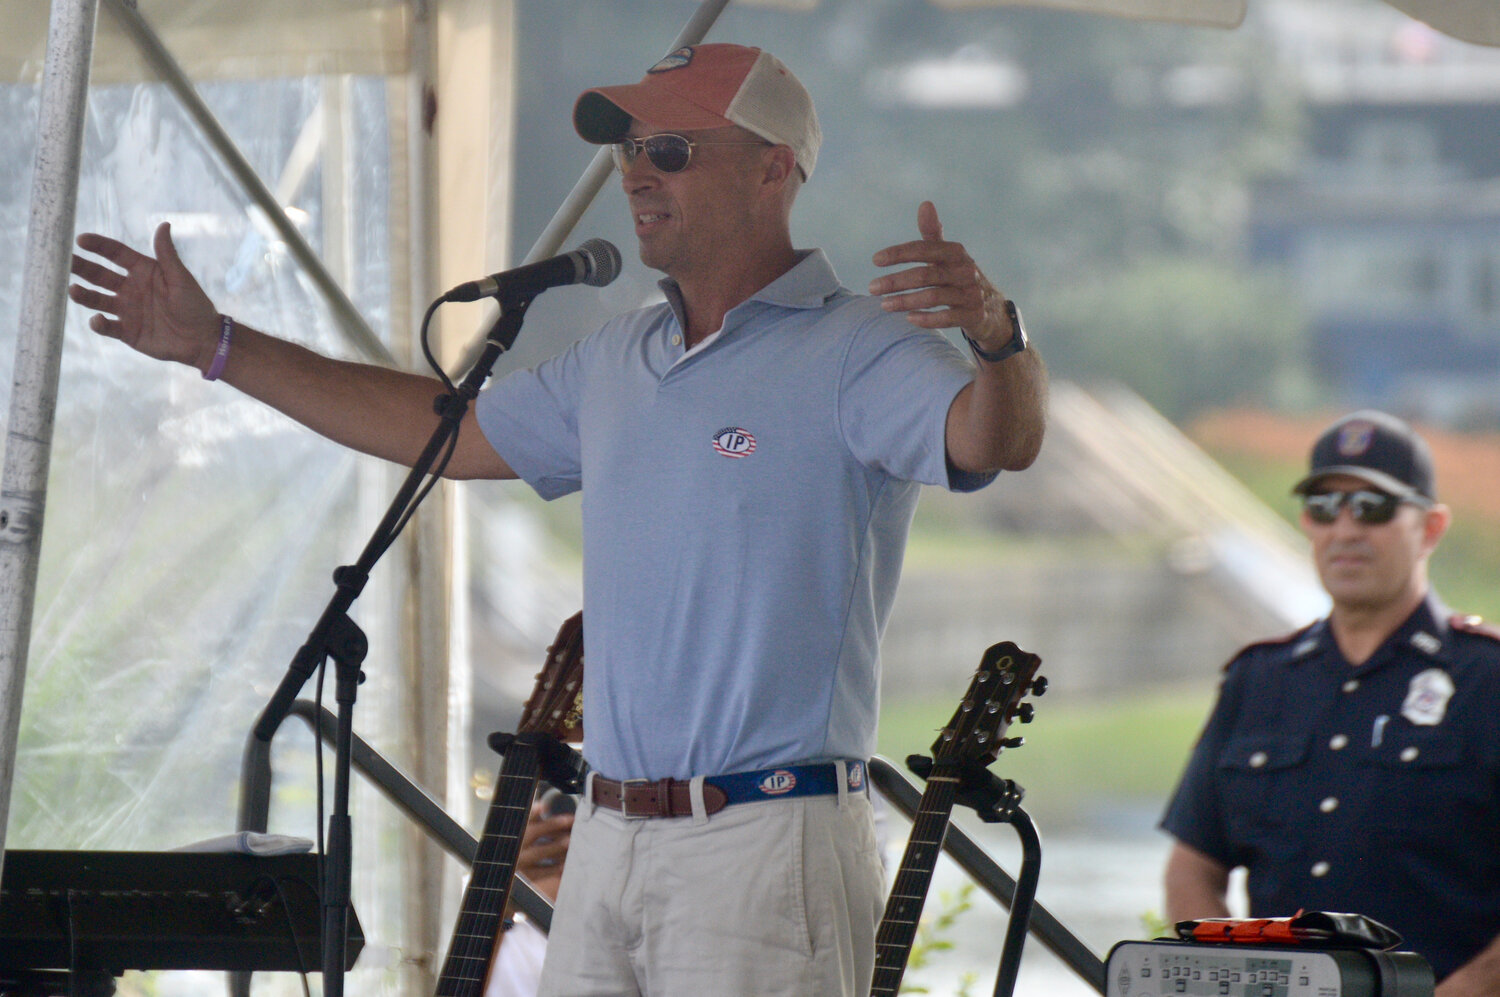 Mike MacFarlane, the owner of Sunset Cove who was celebrating his 50th birthday, introduces Mac McAnnally to the crowd.